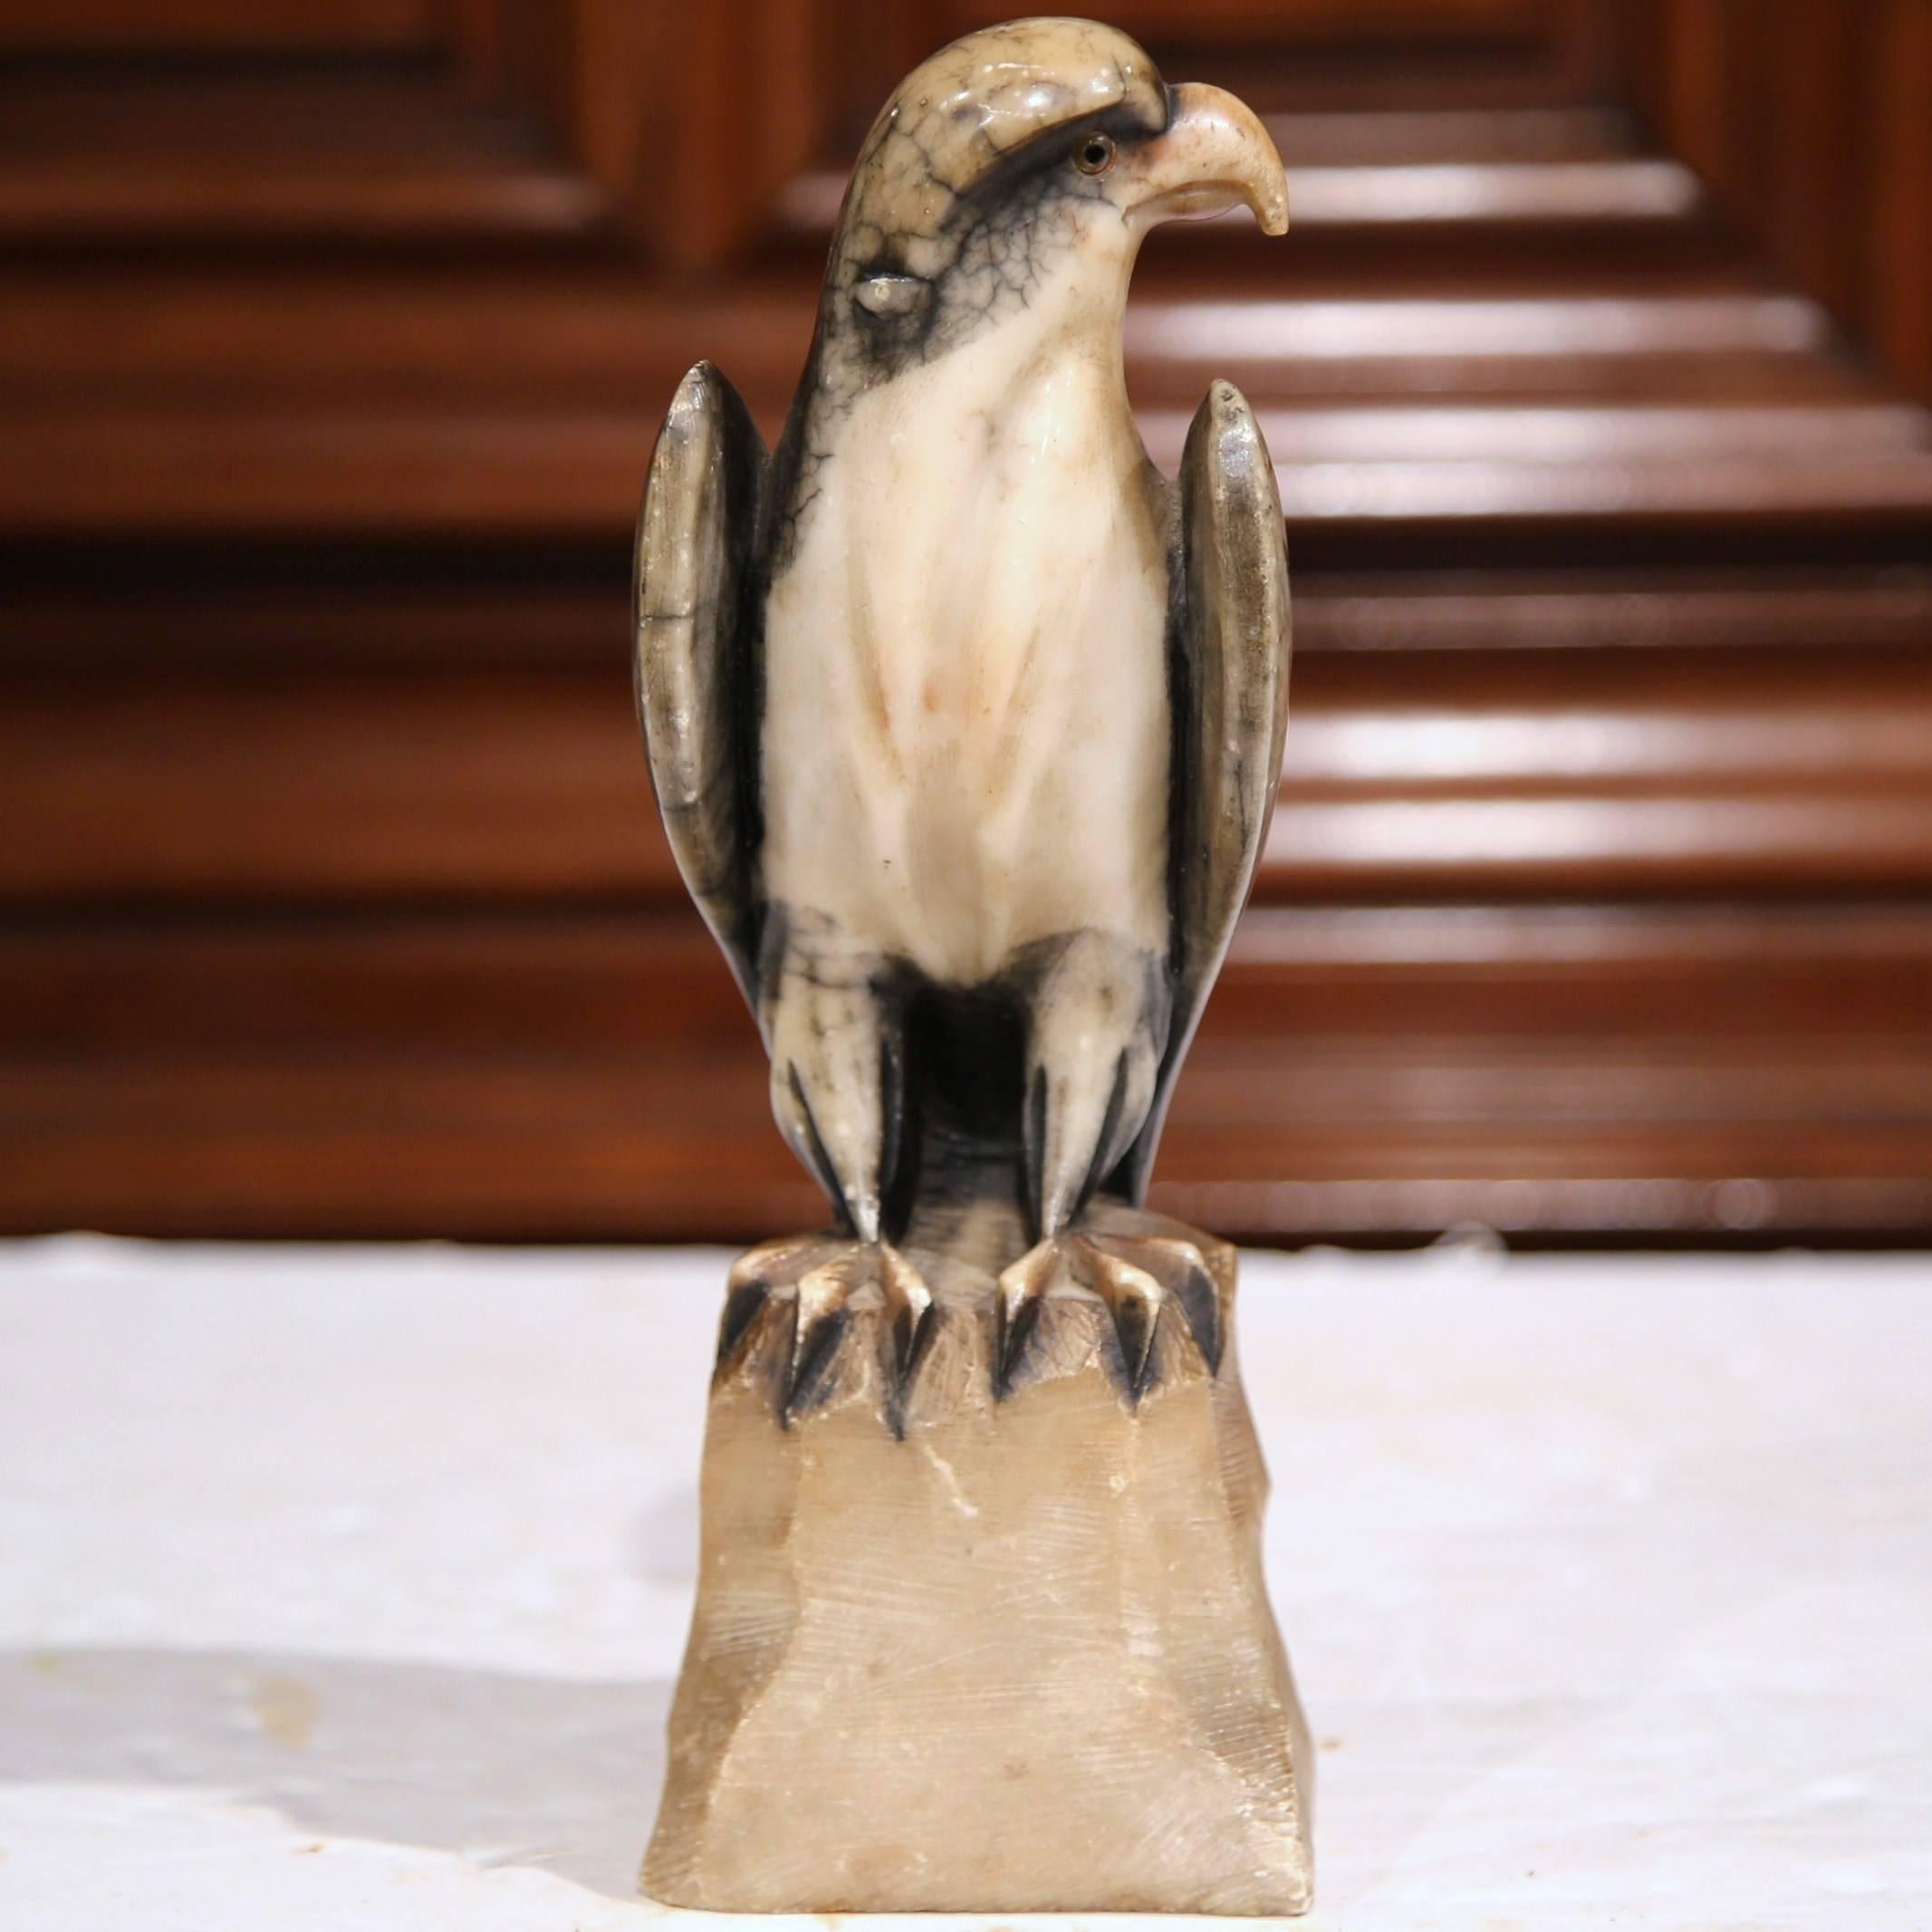 This fine, carved, antique marble eagle was created in France, circa 1860. The gray and white bird sits on a rock with his head turned. Use the avian figure to decorate a mantel, library or study. The sculpture is in great condition with a beautiful